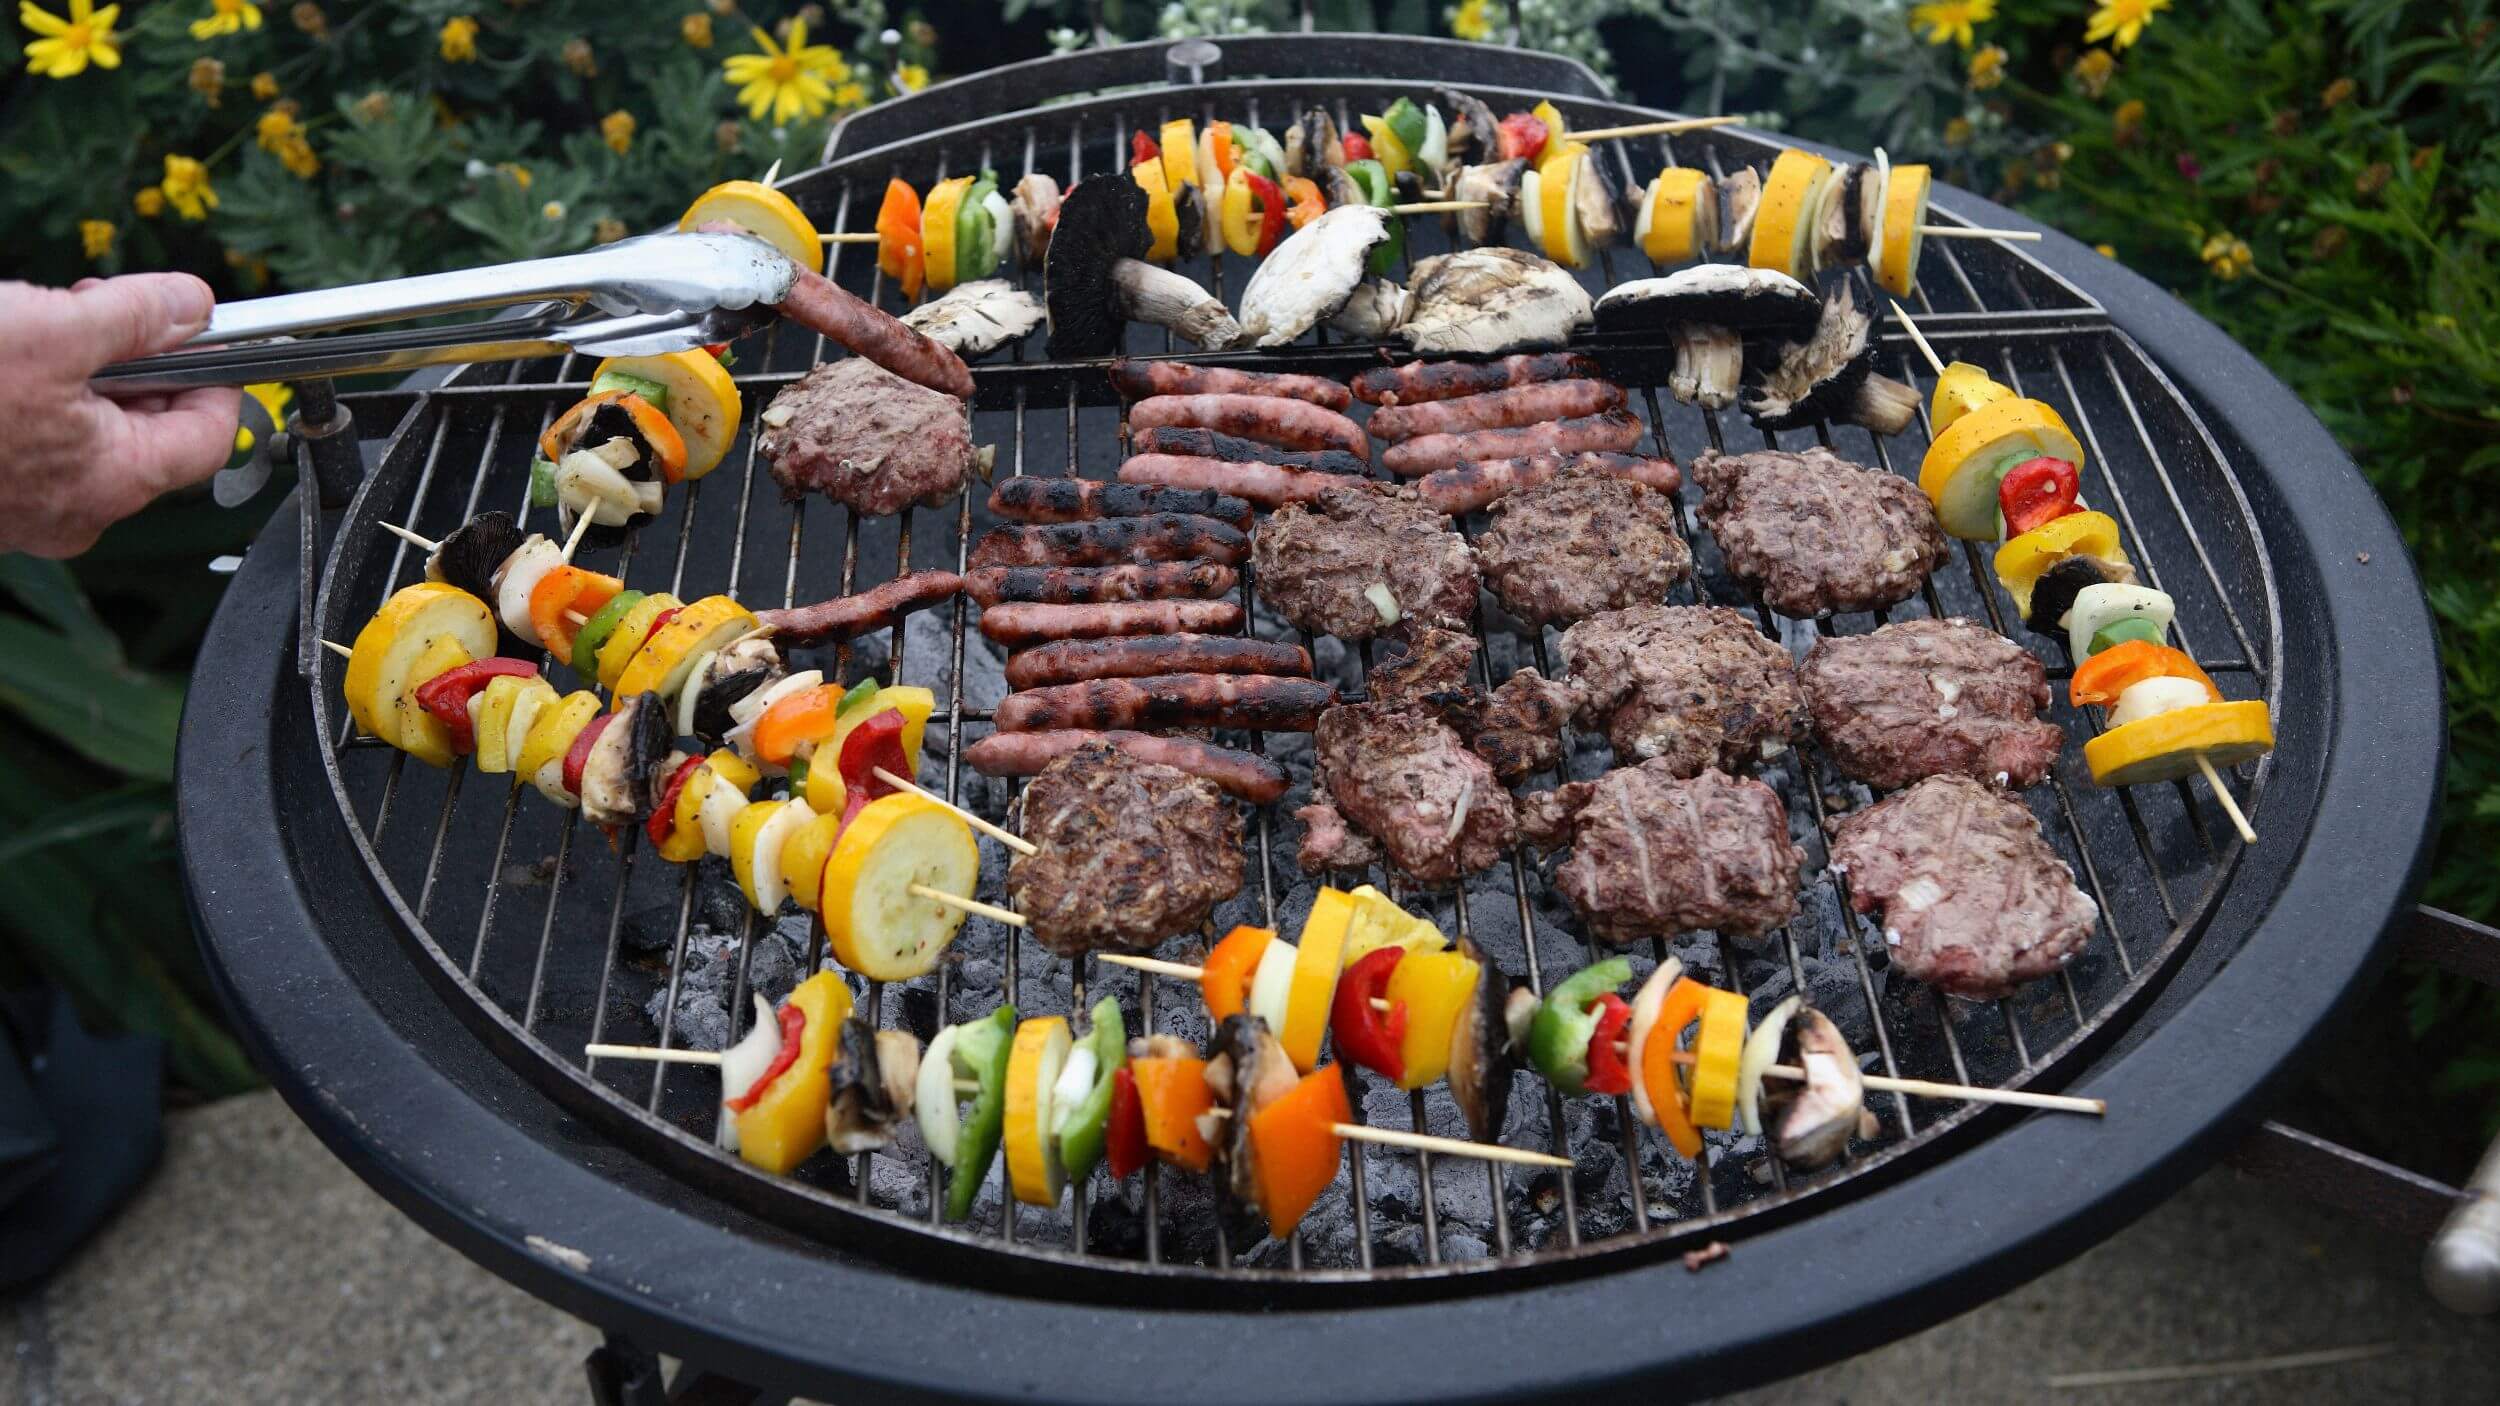 Use charcoal barbecue with right fuel to give the best food flavor